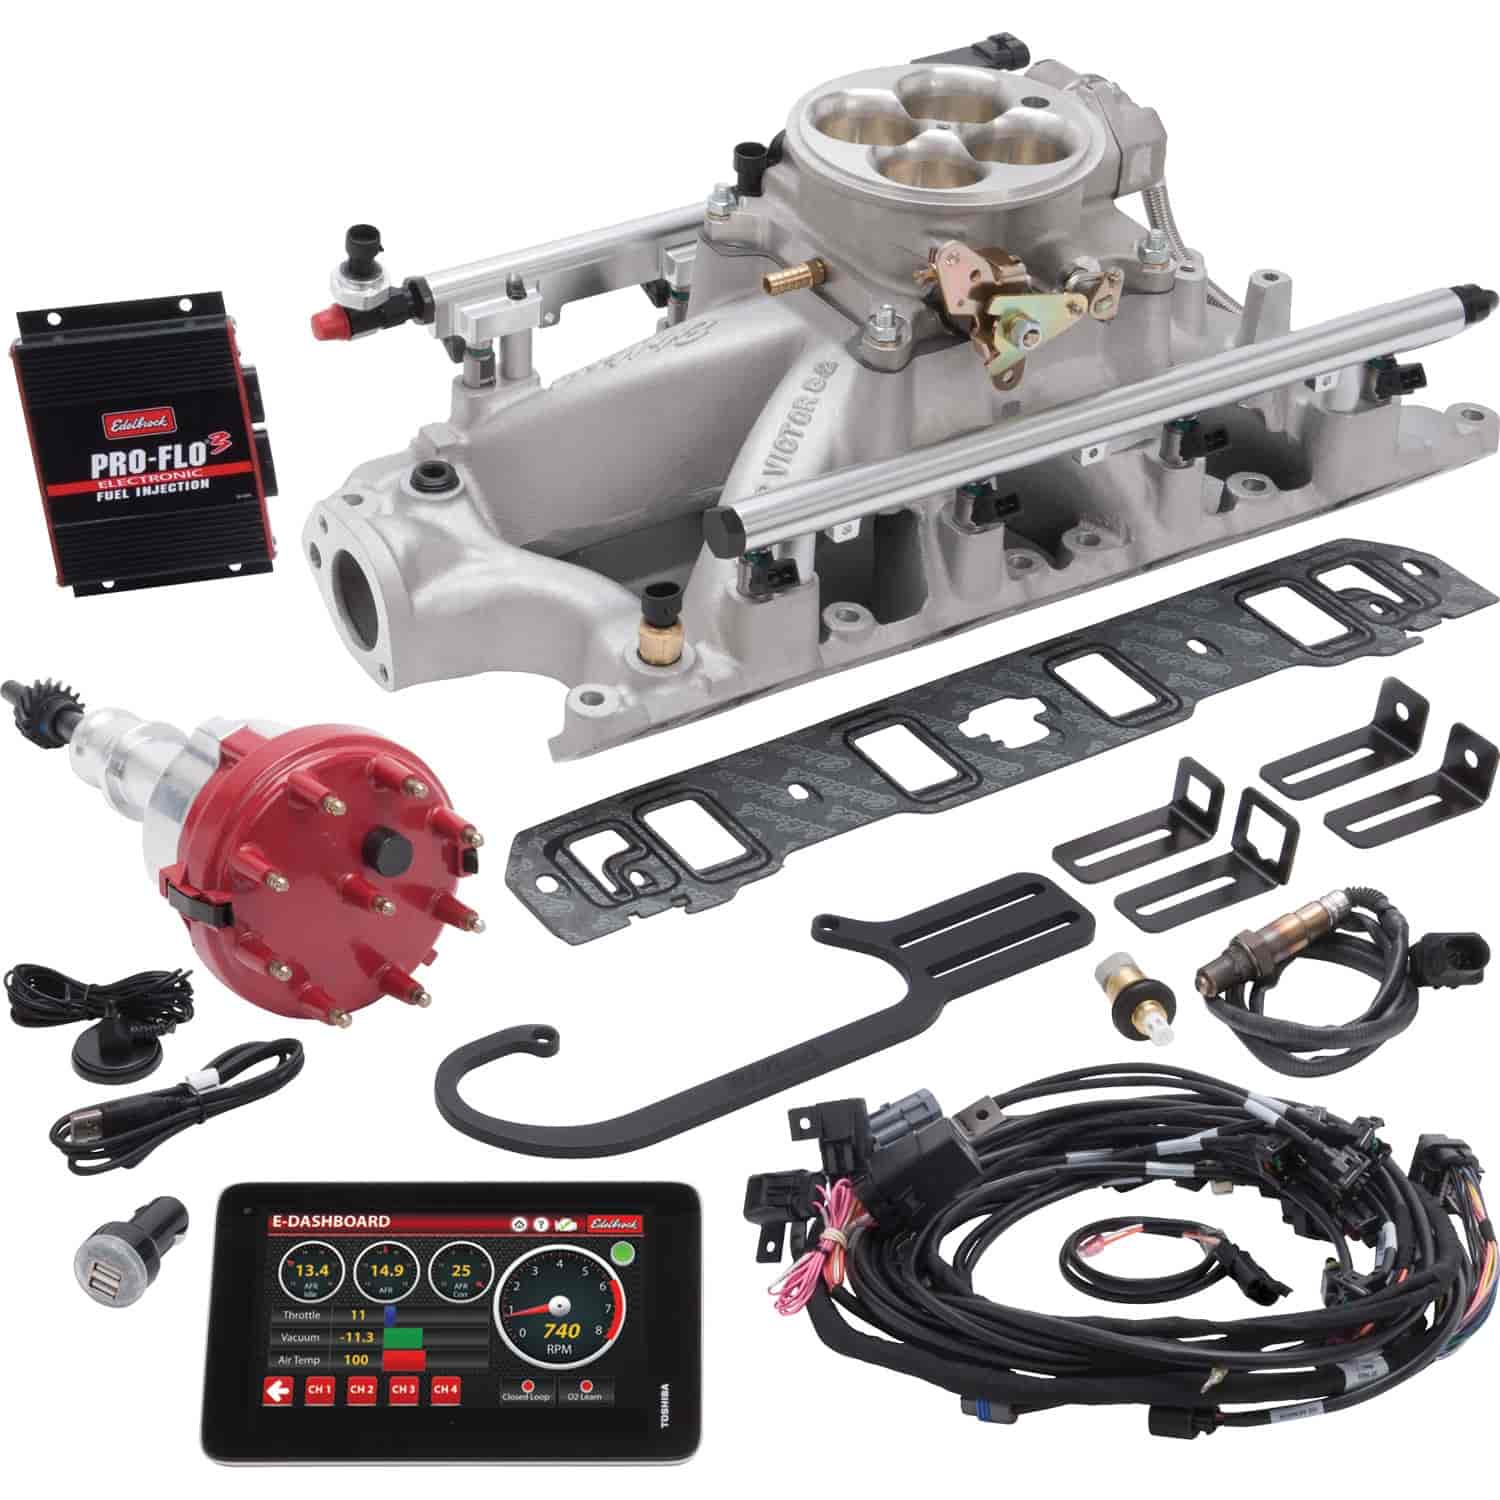 Pro-Flo 3 EFI System Small Block Ford